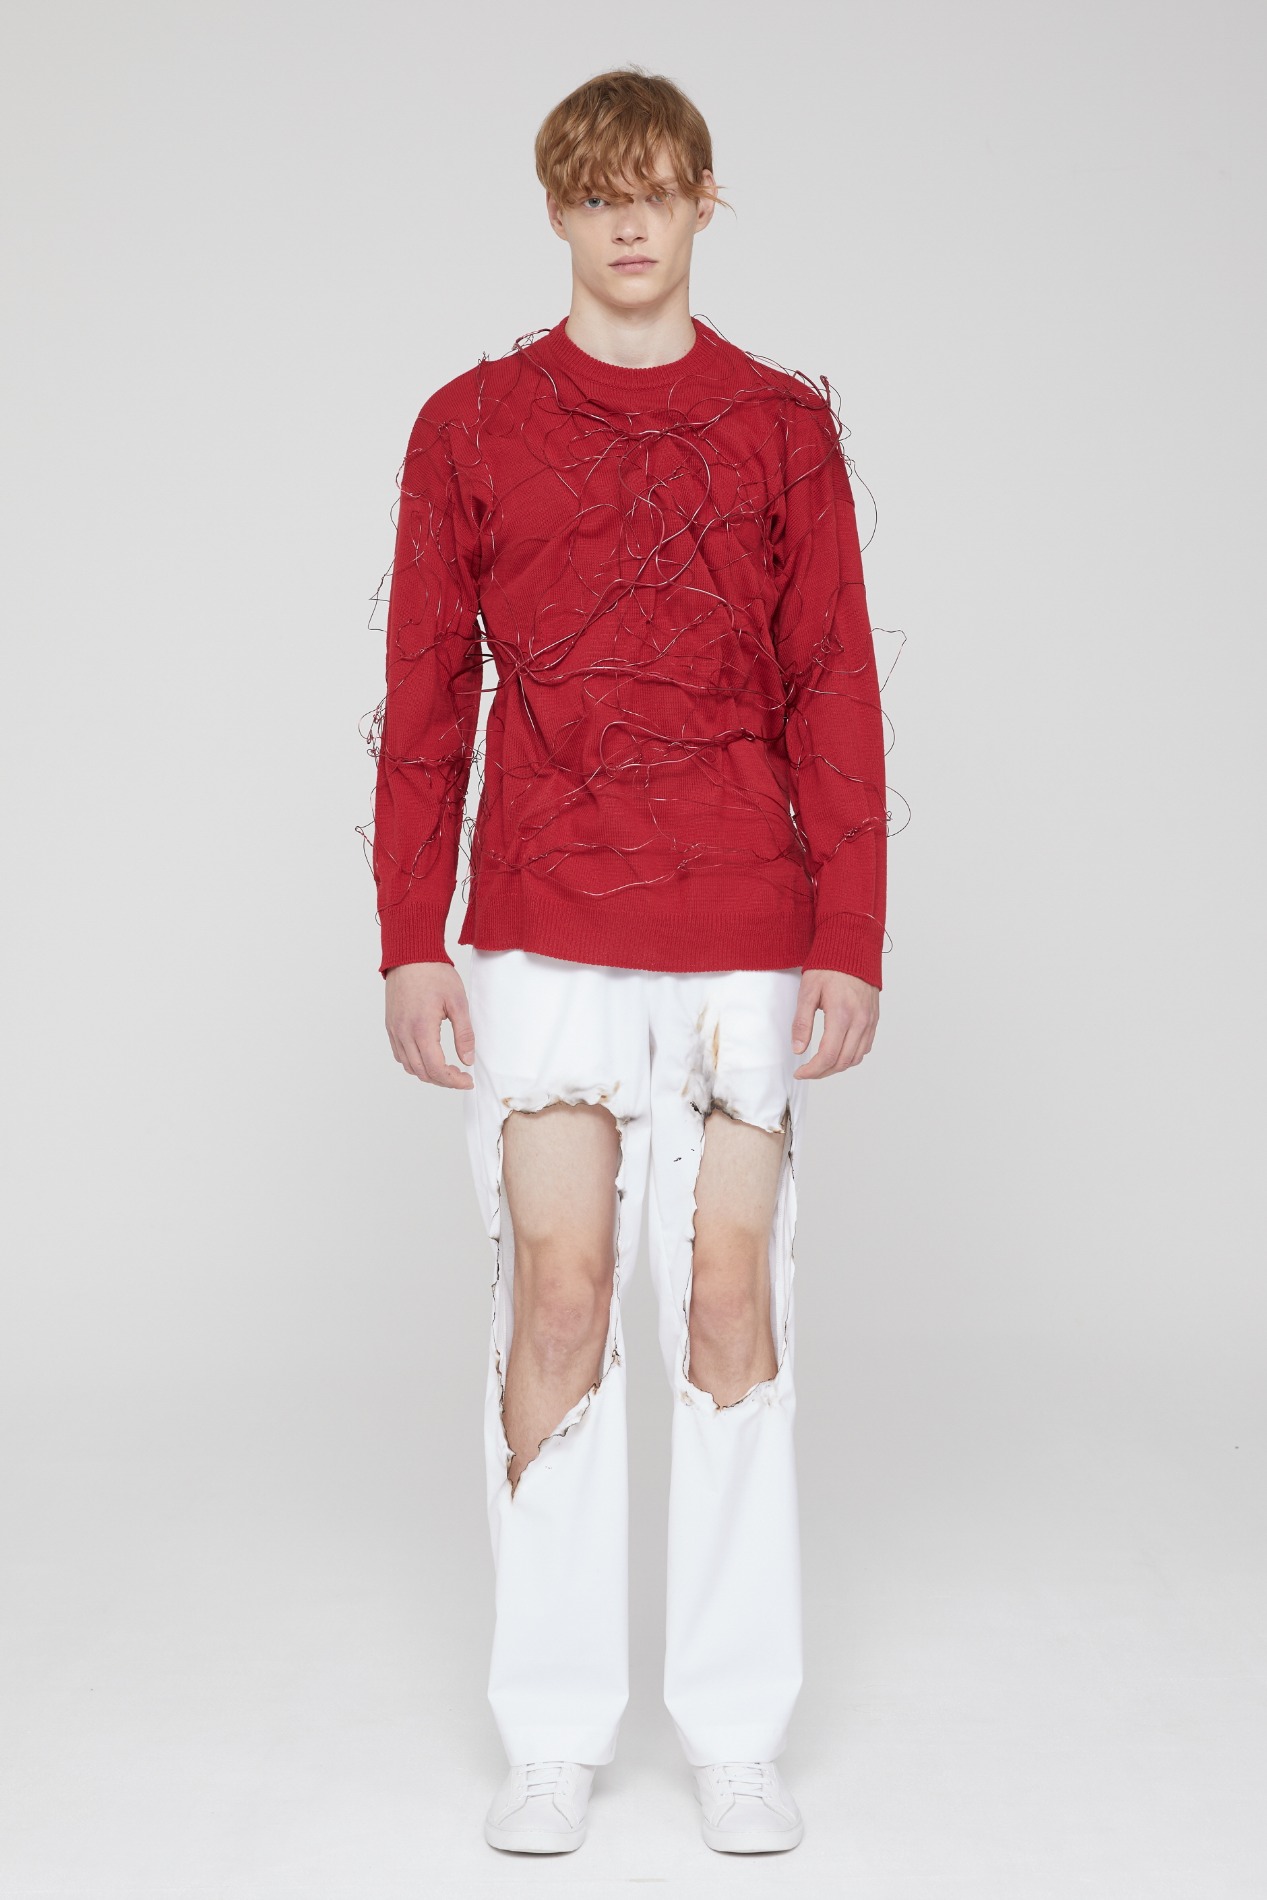 [ATELIER LINE] THORN KNIT (RED)